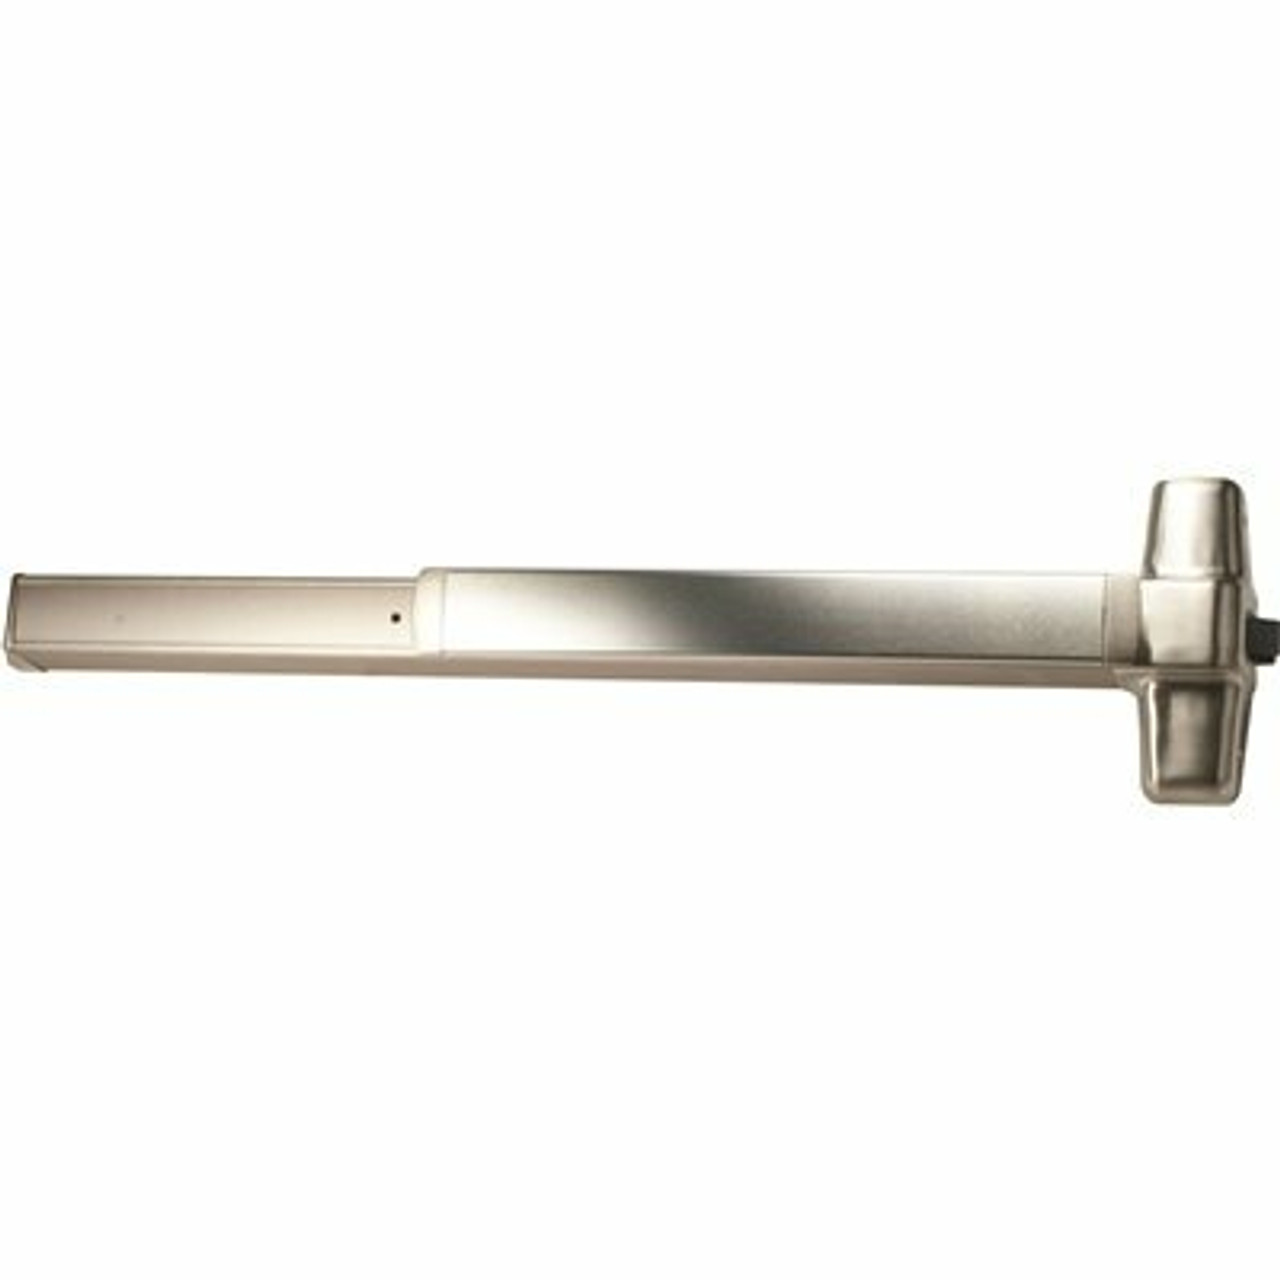 Von Duprin Grade-1 Stainless Steel Rim Exit Device, Non-Handed, Exit Only